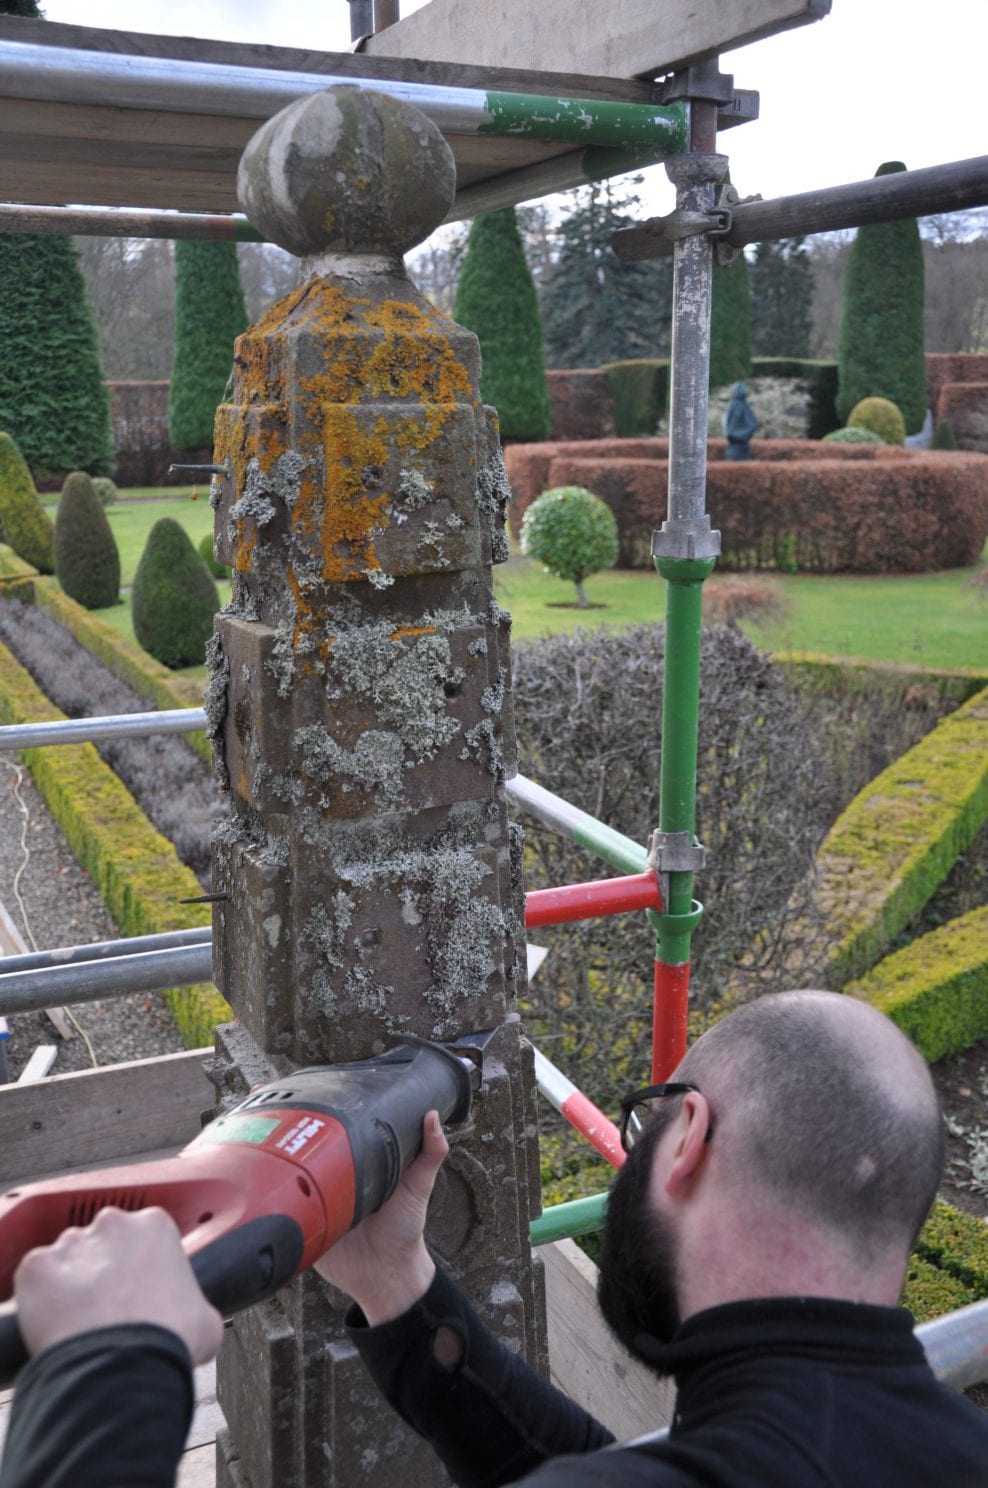 Careful cutting through a mortar joint to dismantle the Drummond Castle Obelisk Sundial